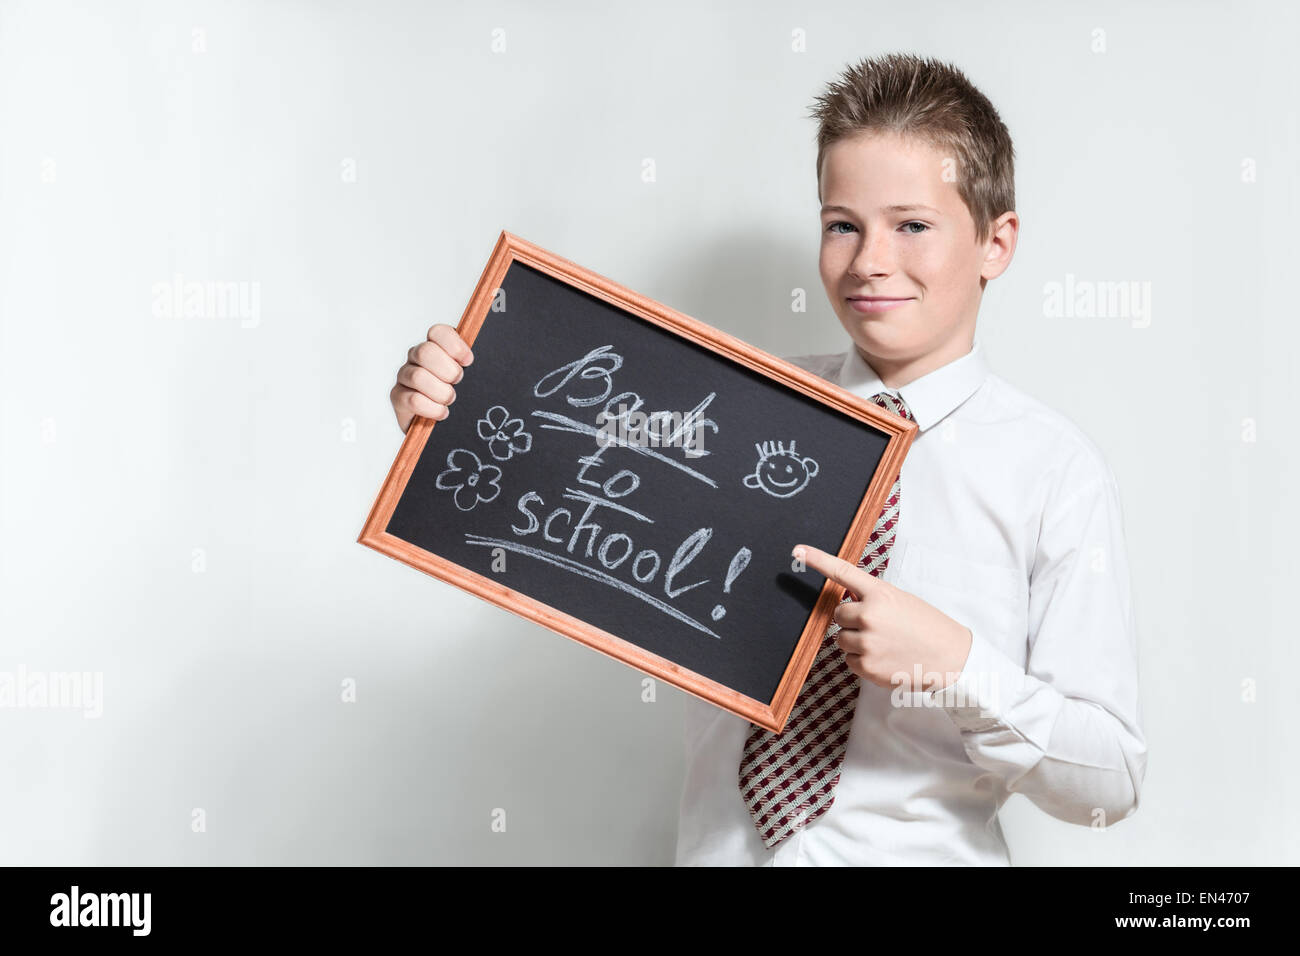 Smiling schoolboy with chalkboard Stock Photo